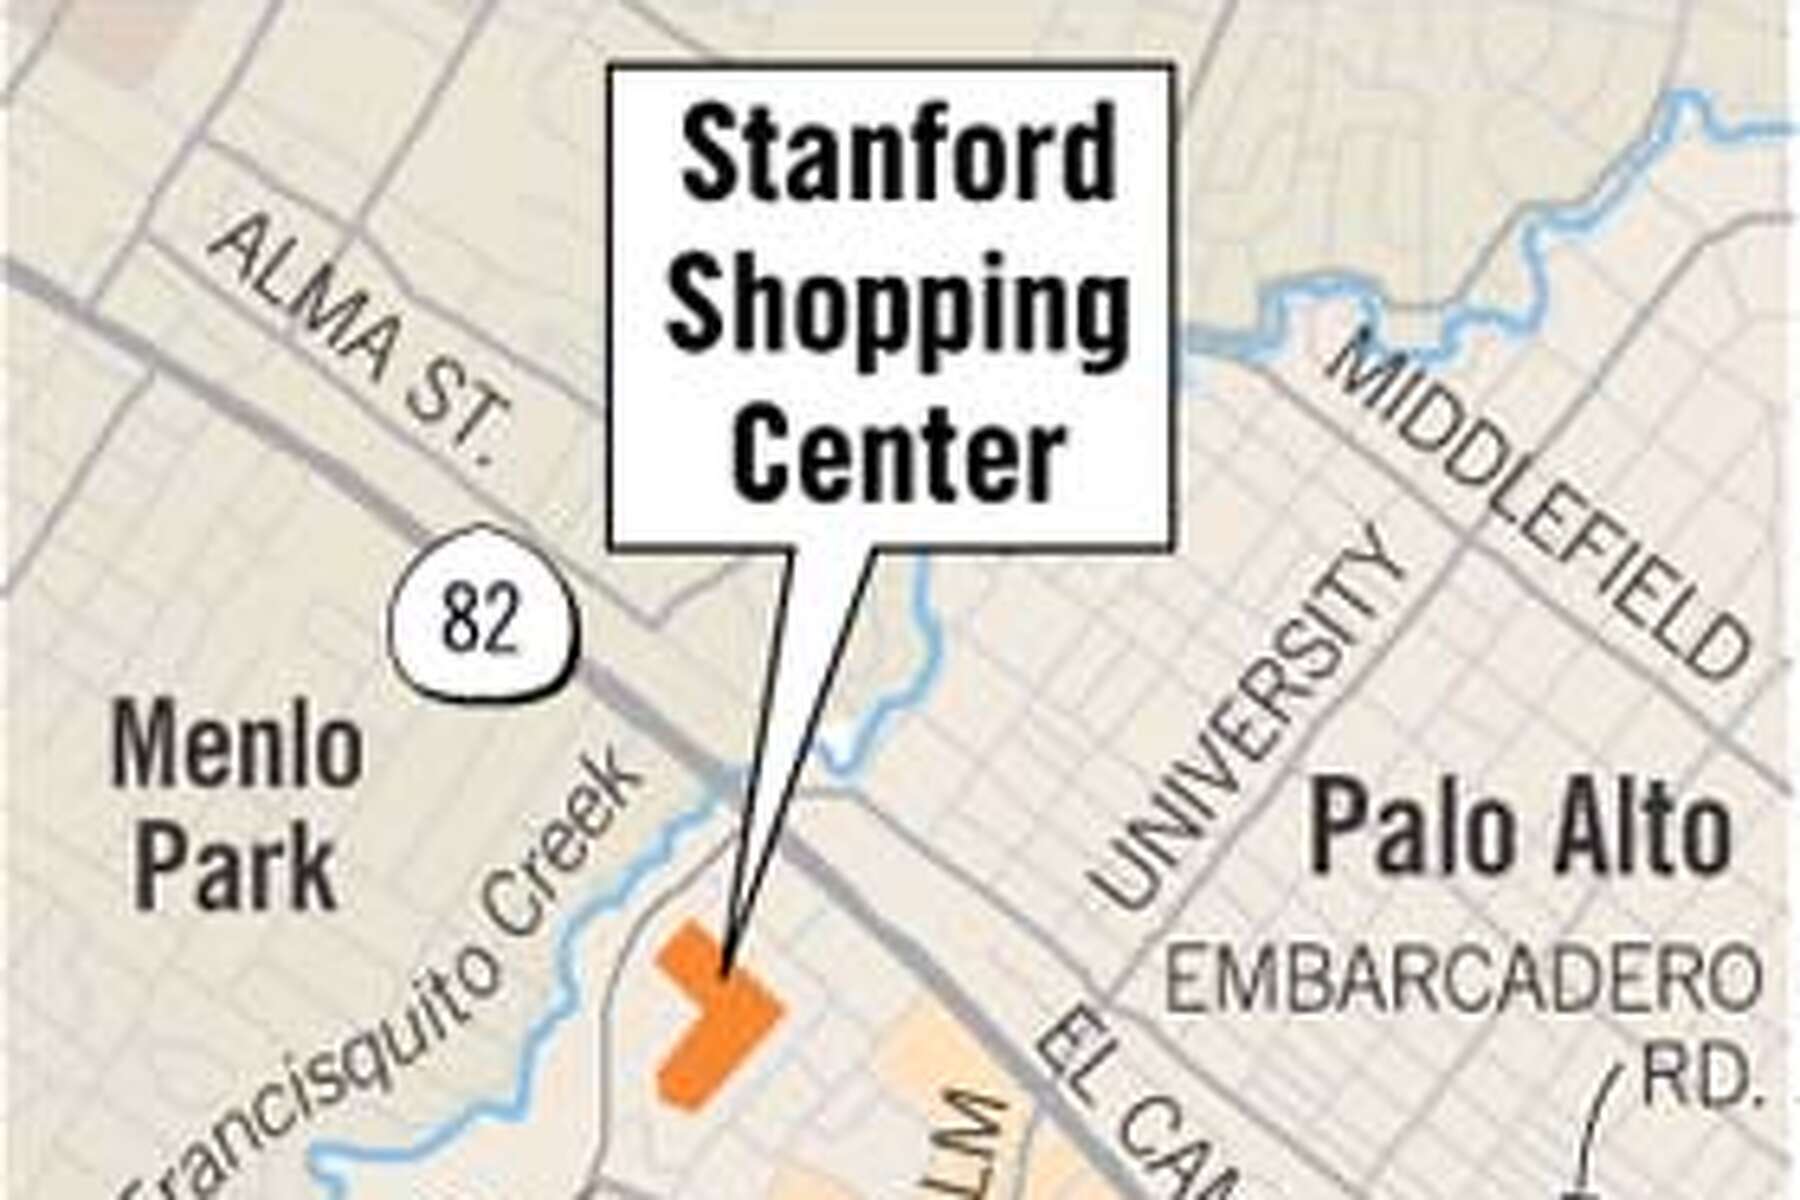 Stanford Shopping Center - our home since 1956!